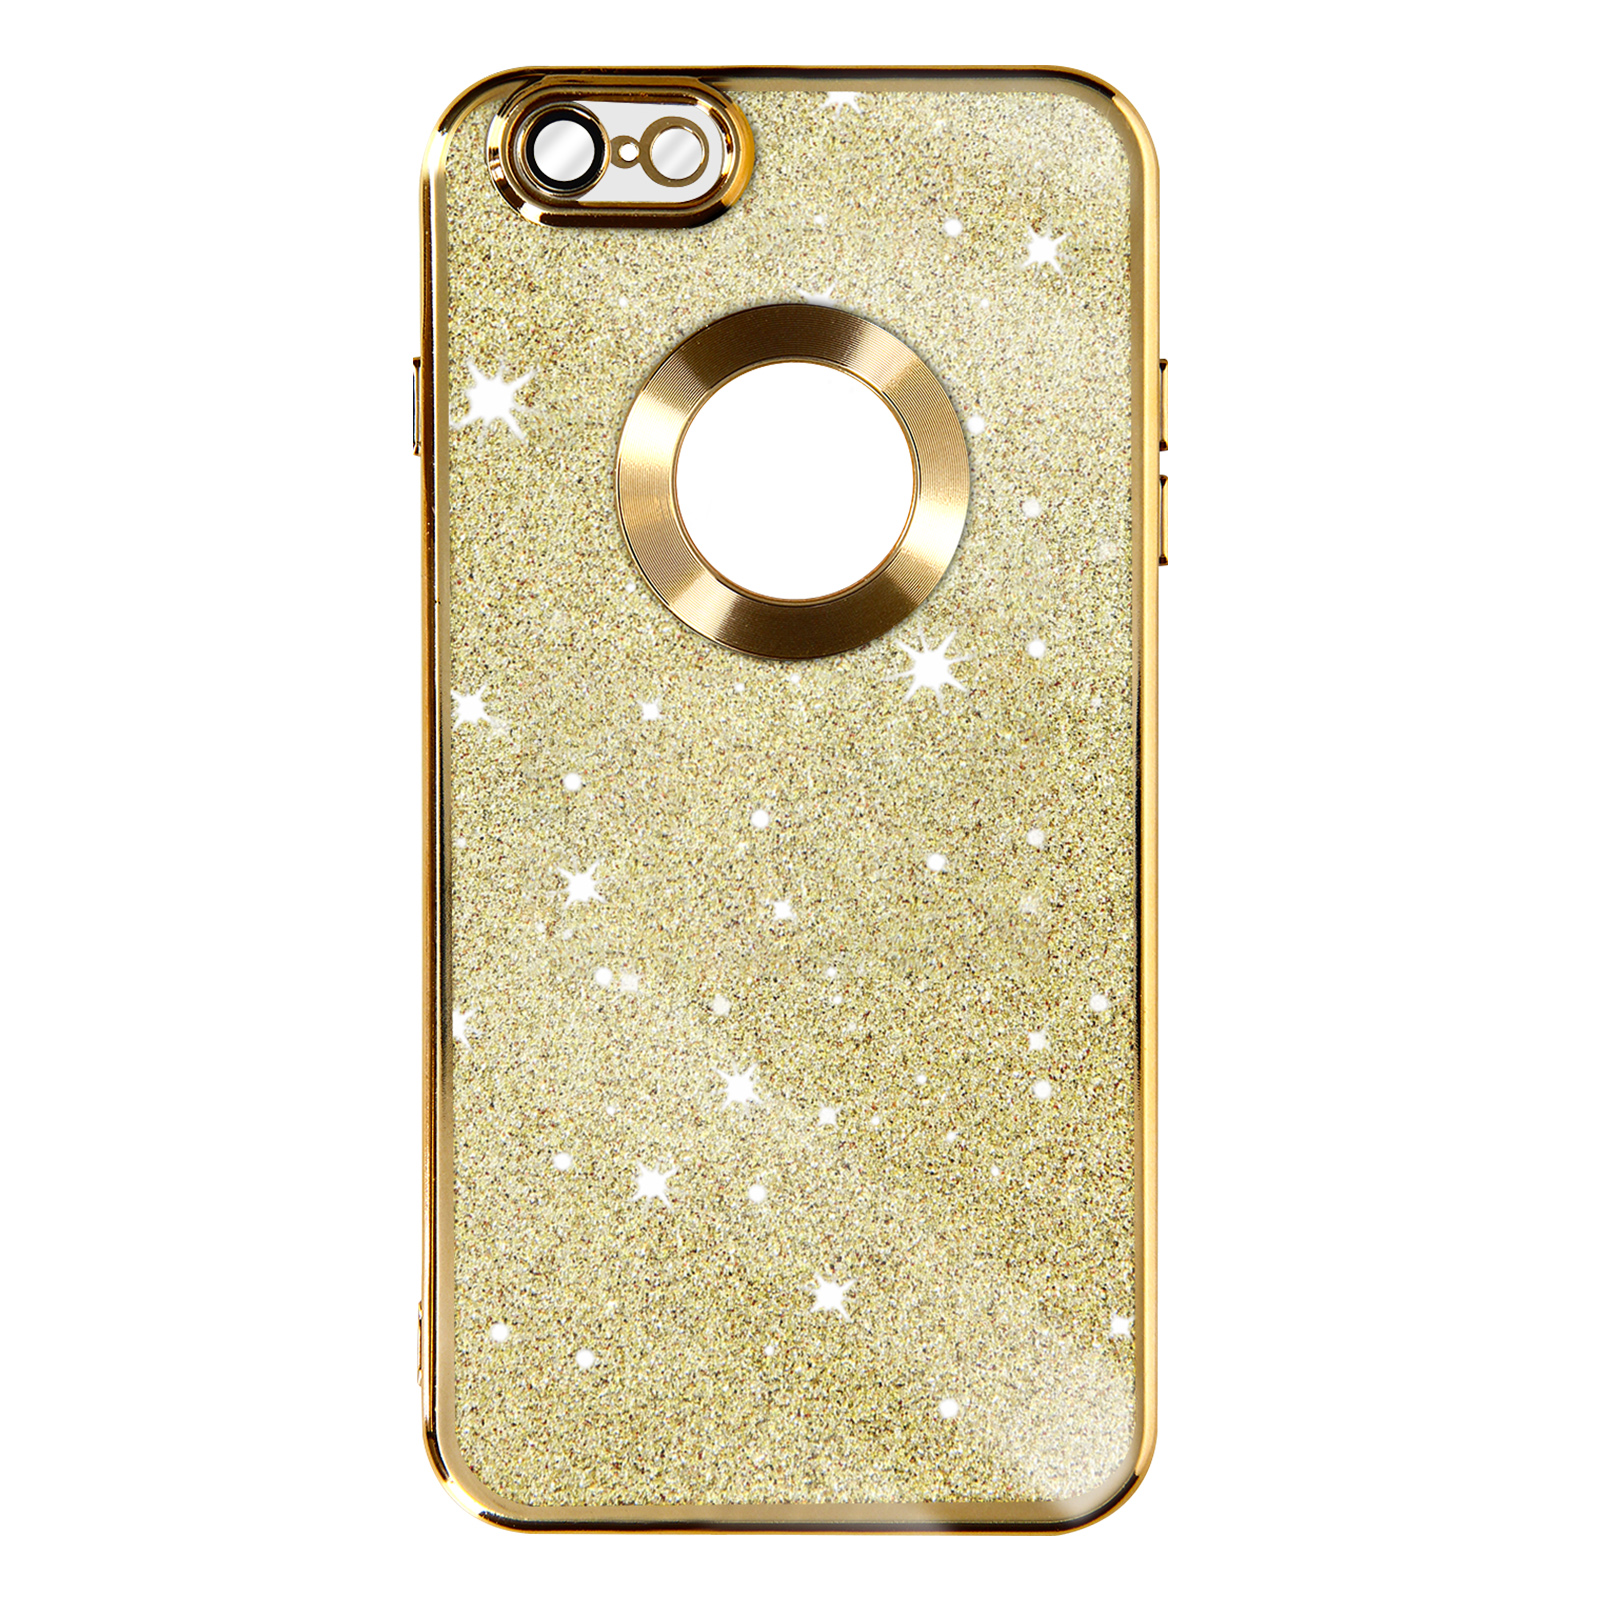 Protecam 6S Backcover, Apple, Series, AVIZAR Plus, iPhone Gold Spark